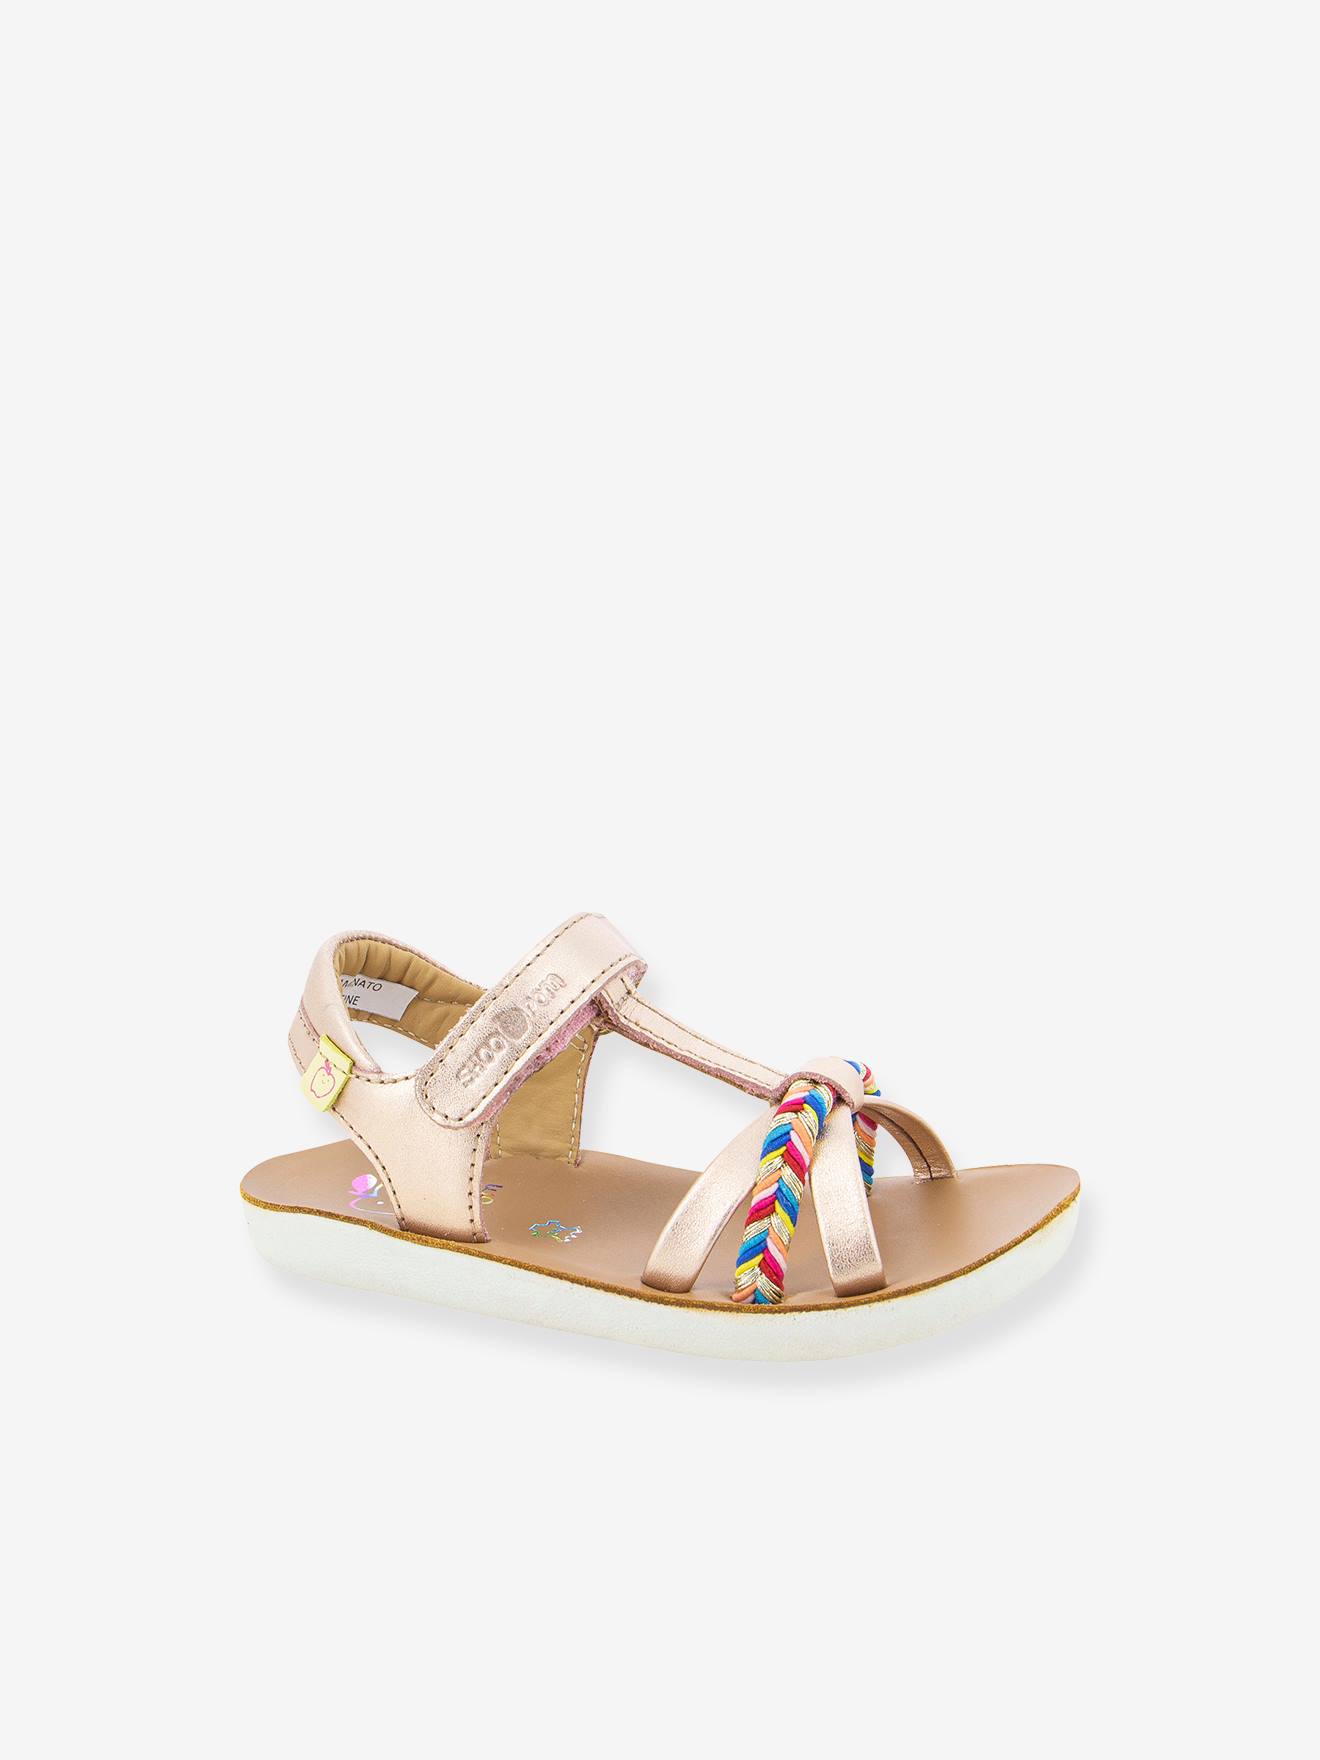 Goa Salome Sandals by SHOO POM(r) iridescent copper